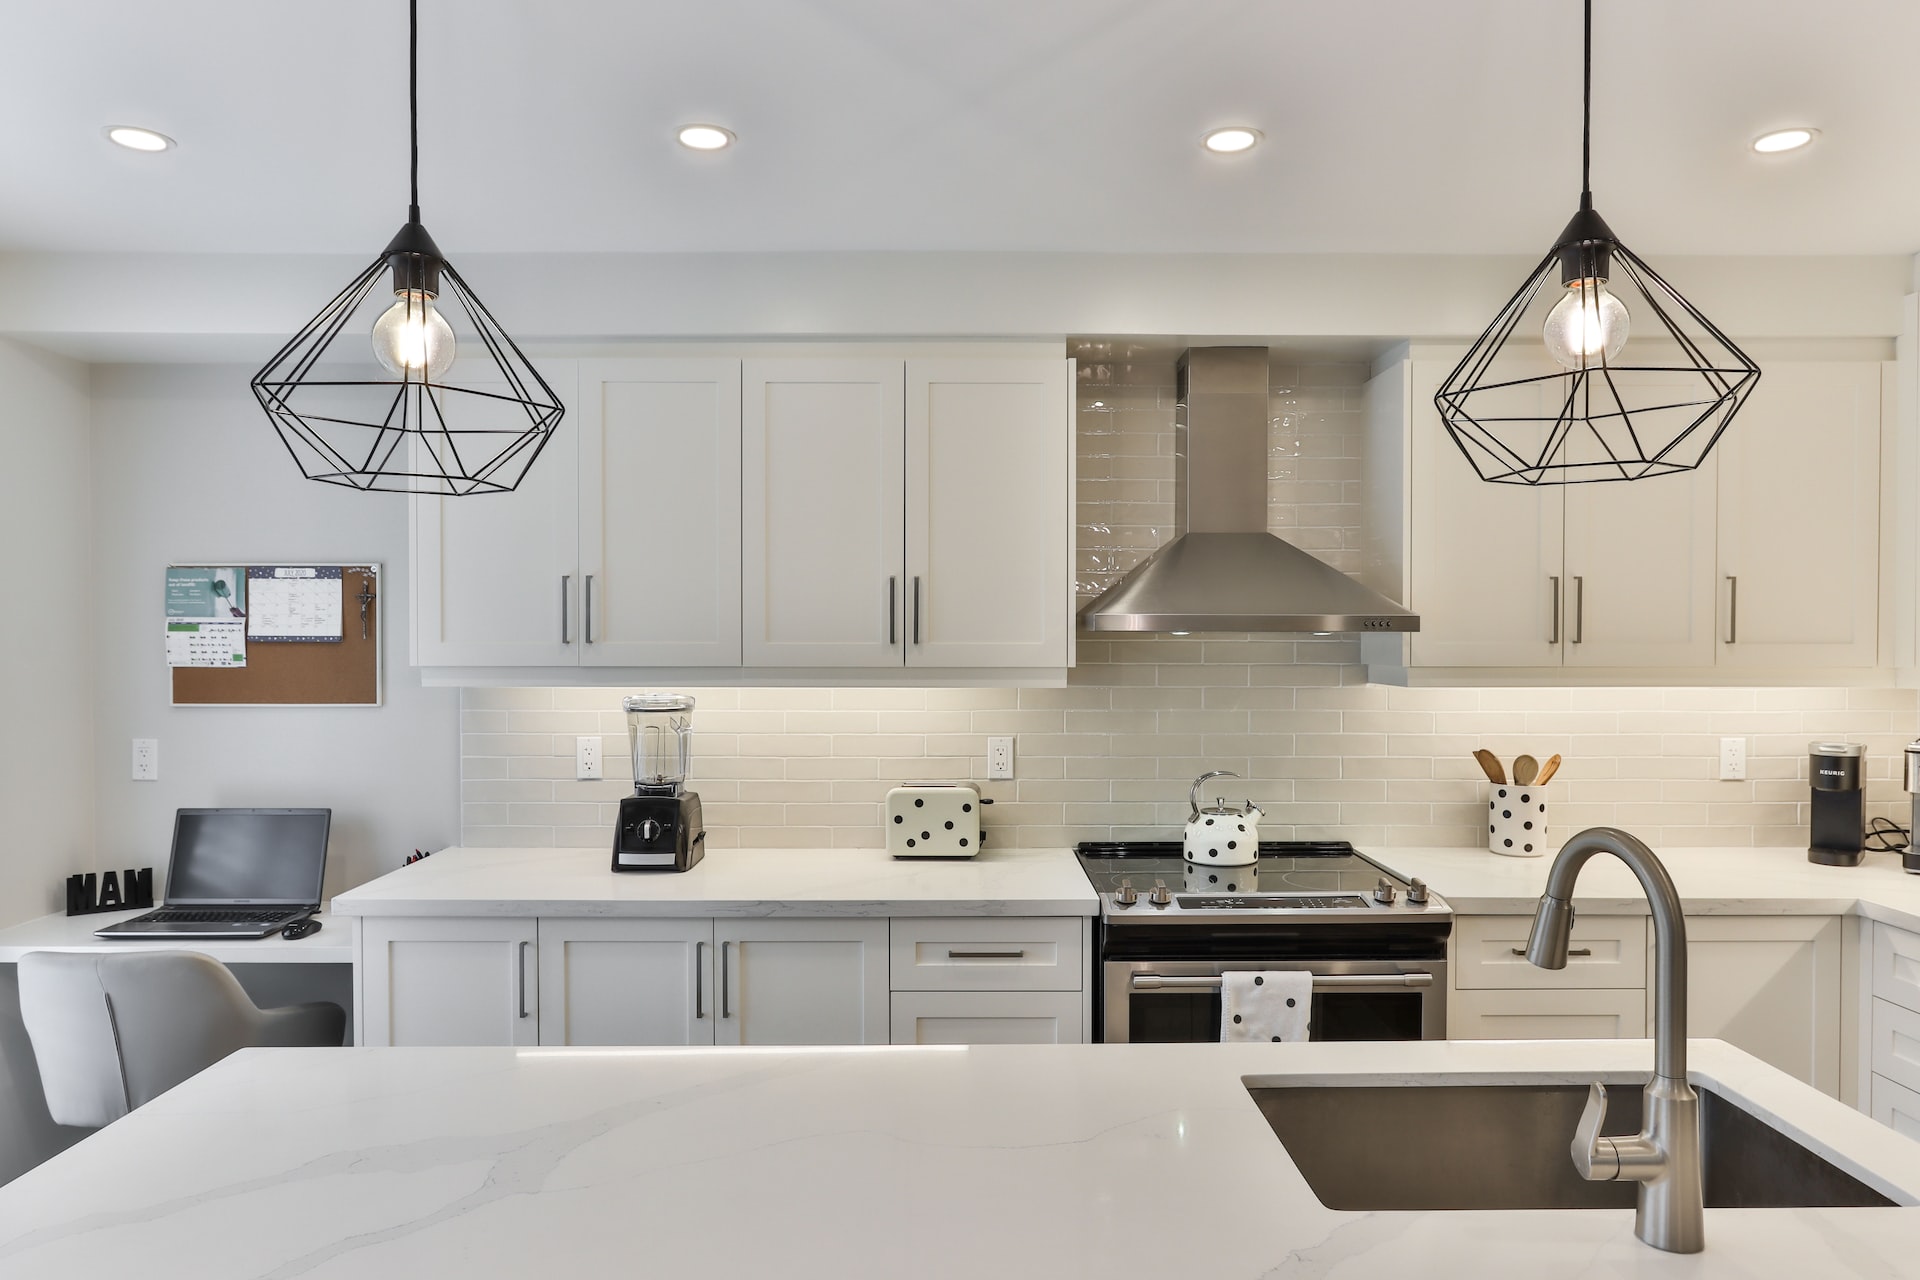 A Brief Look at the 3 Most Common Reasons for Remodelling a Kitchen